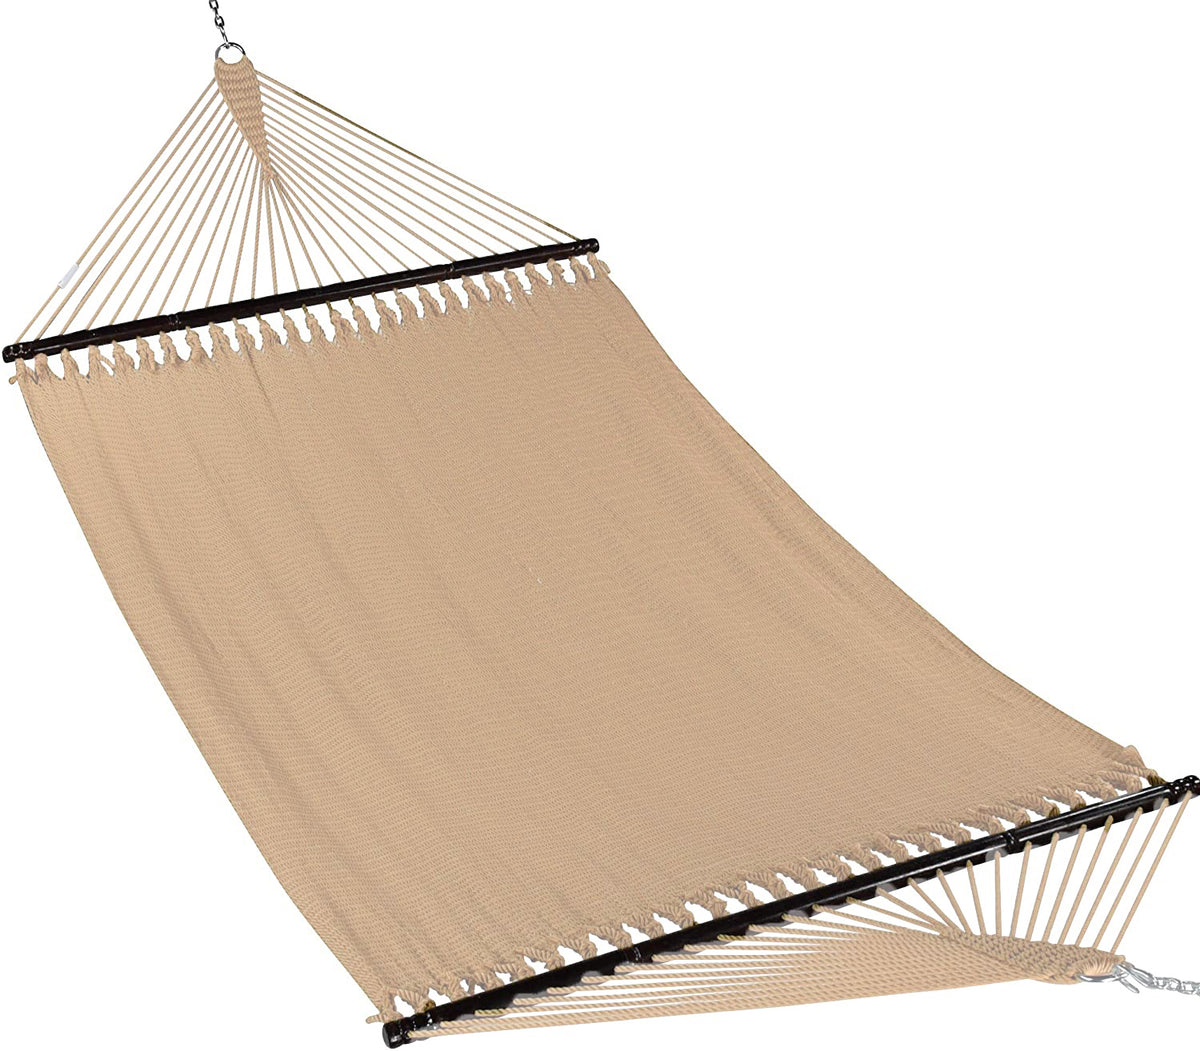 JUNELILY Polyester Rope Hammock, Double Wide Two Person with Spreader Bars - For Outdoor Patio, Yard, Porch